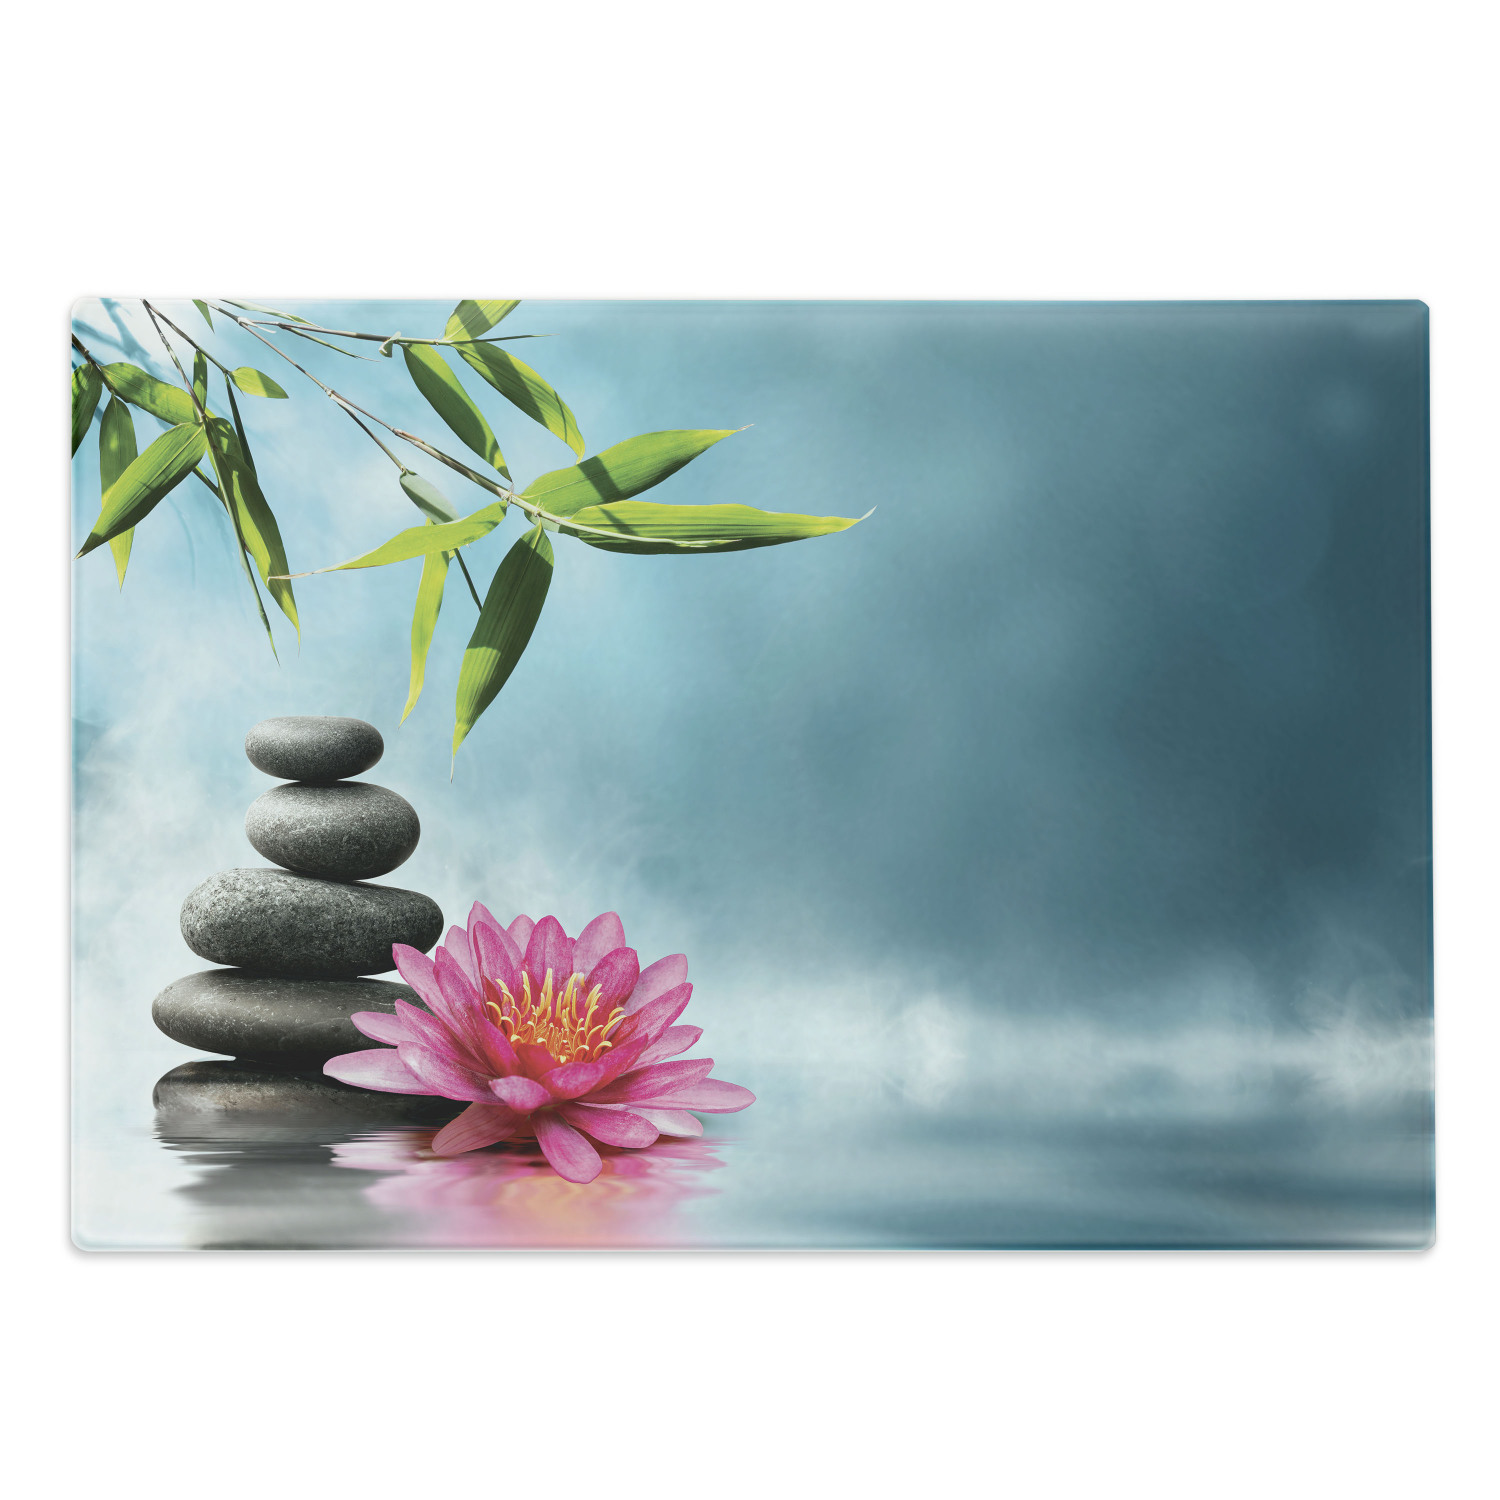 Spa Cutting Board, Theme Lily Lotus Flower and Rocks Yoga Style Purifying Your Soul Theme, Decorative Tempered Glass Cutting and Serving Board, Large Size, Blue Pink Green, by Ambesonne - image 1 of 1